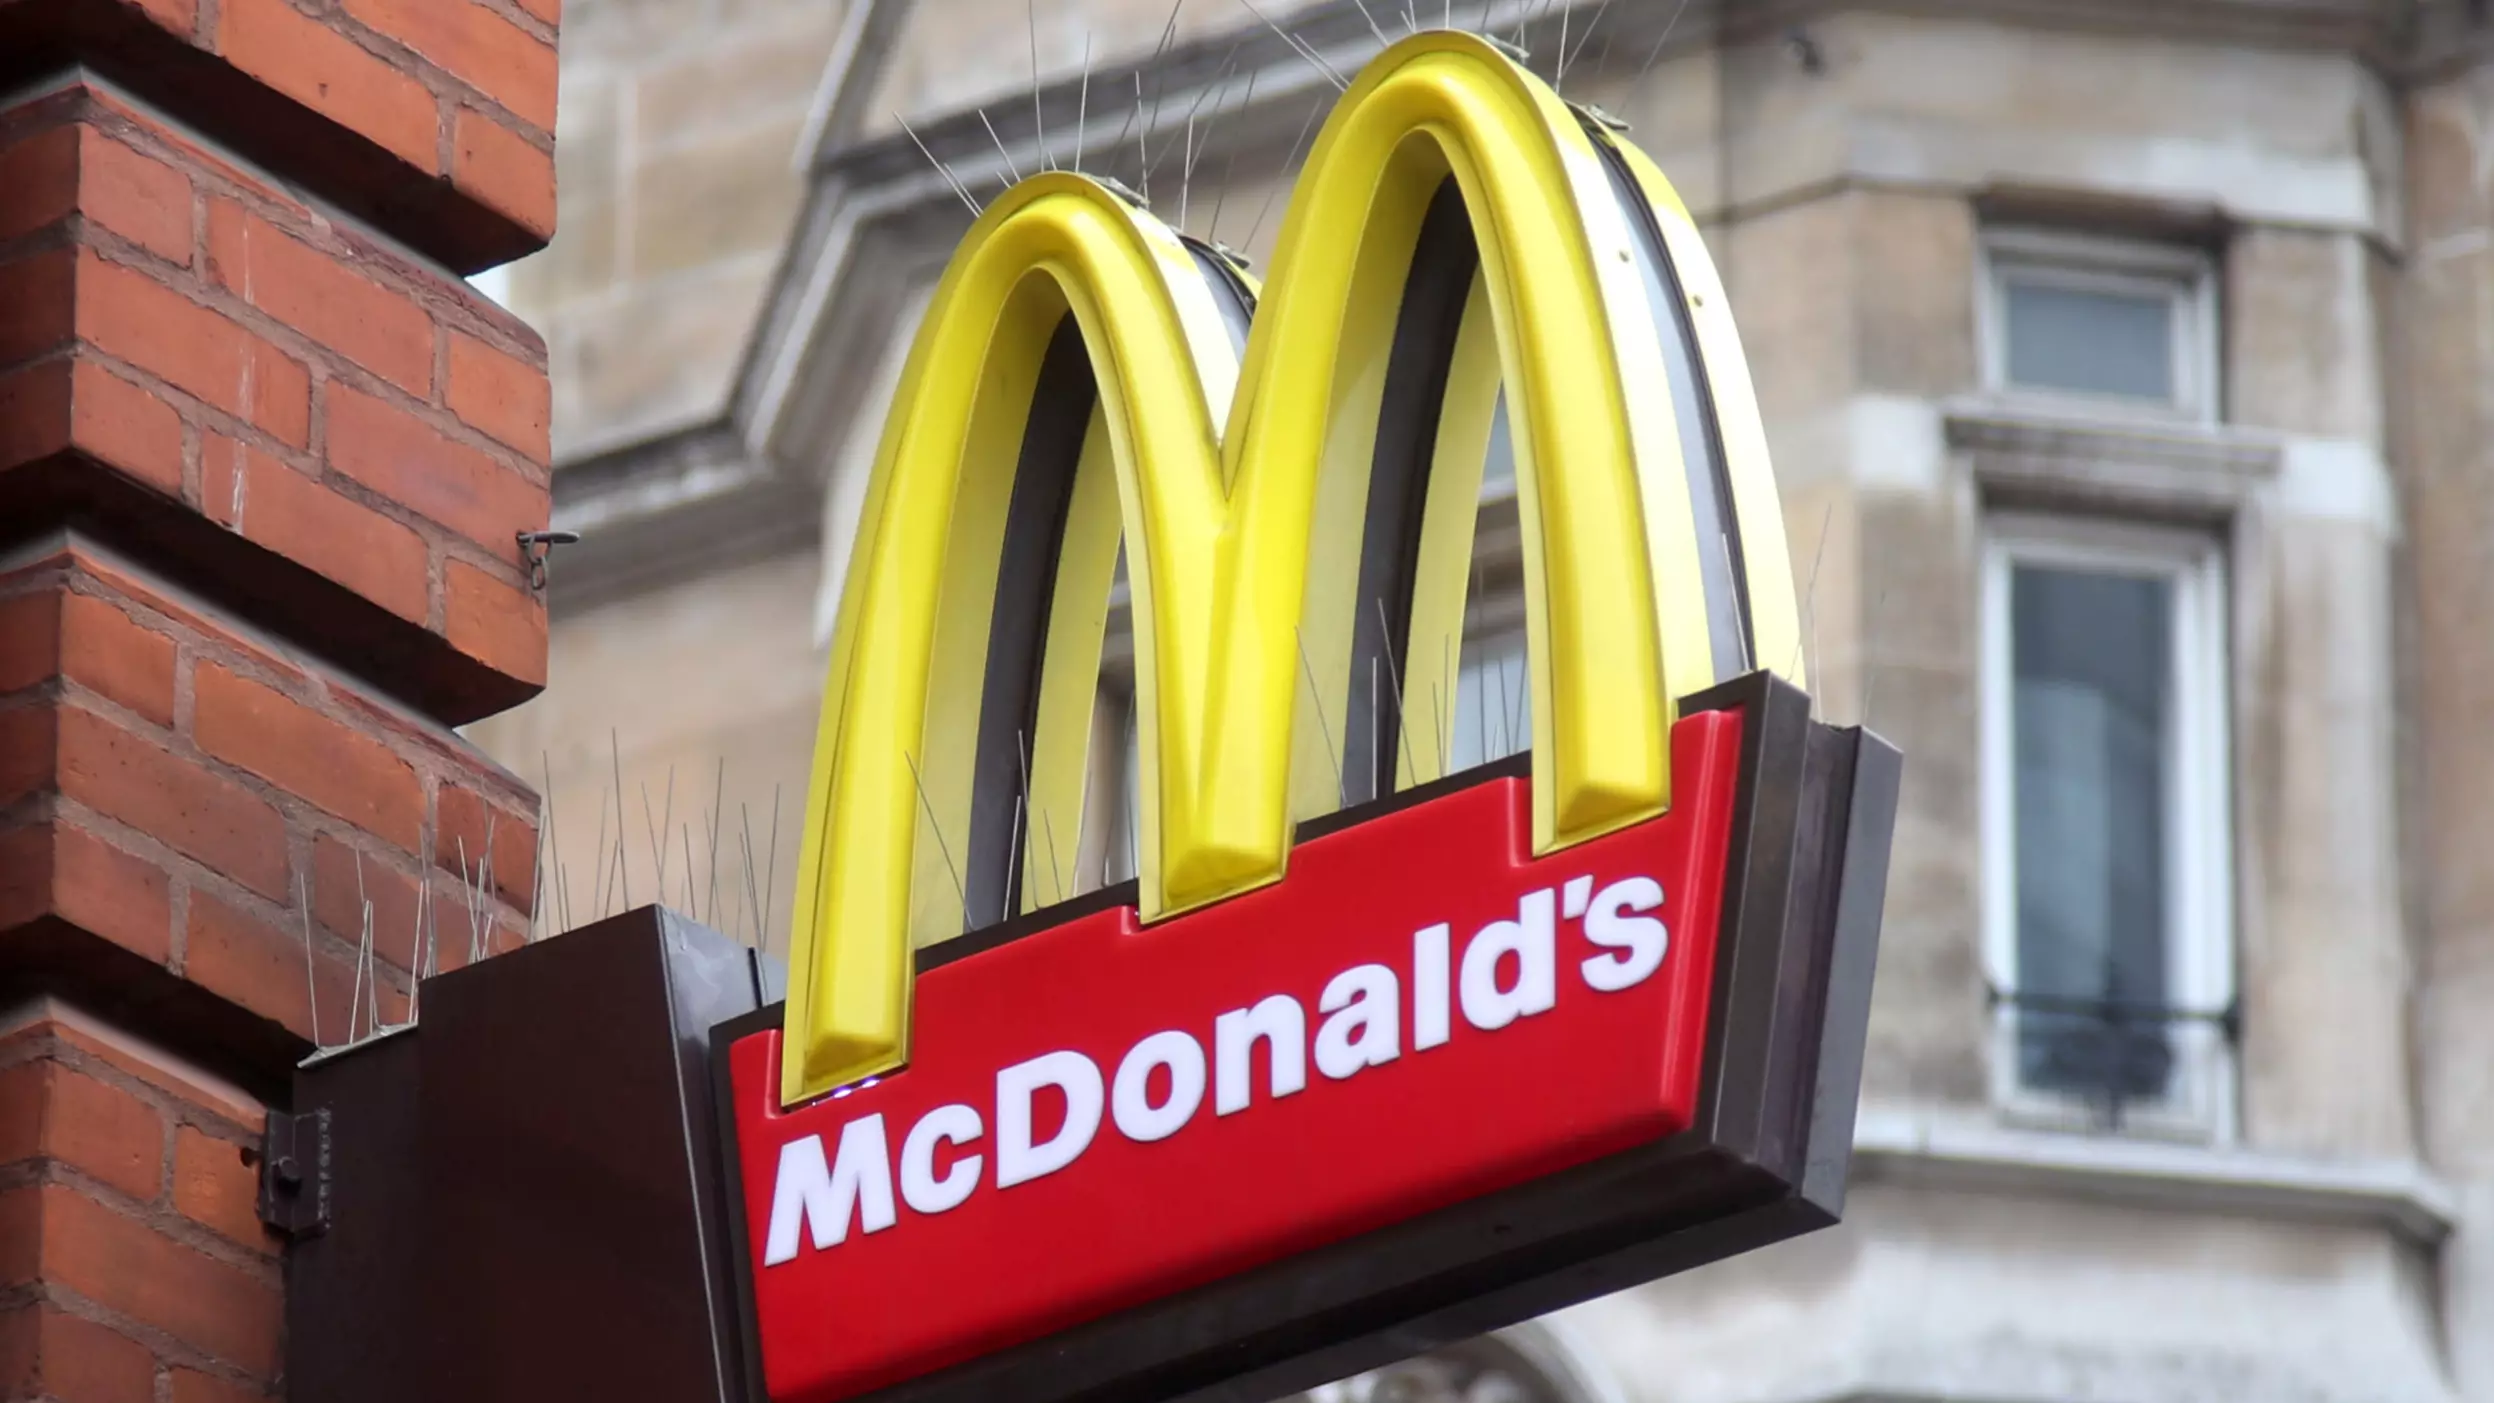 Residents Angry Over Plans To Build McDonald's In Only County Without One